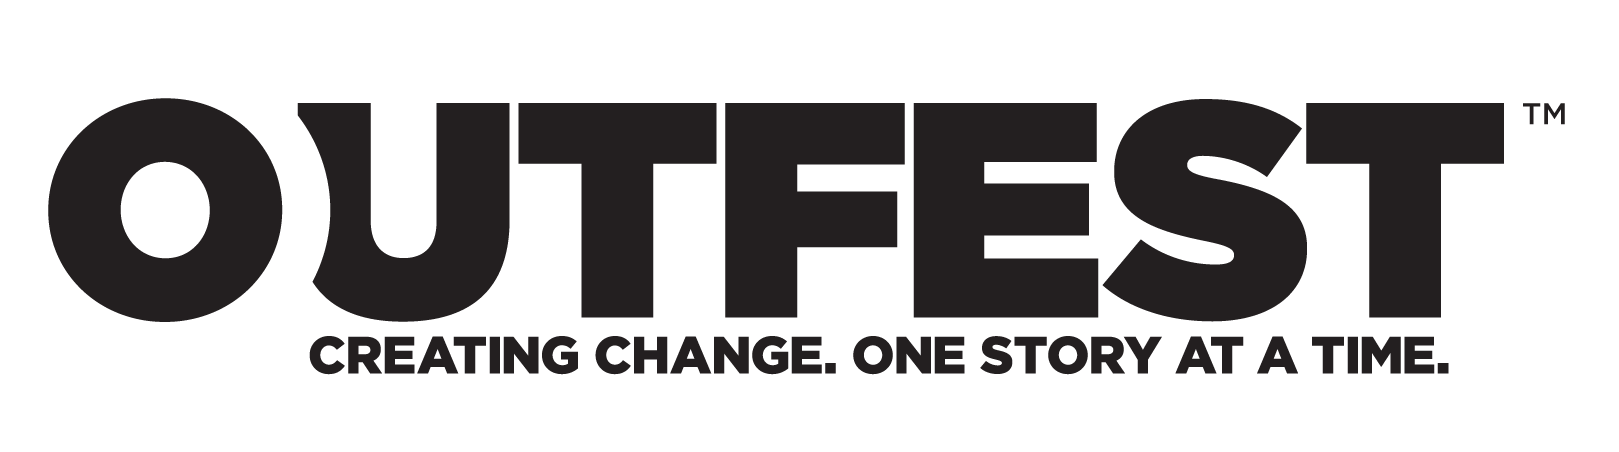 OutfestLogo_WITH-TM-3.png